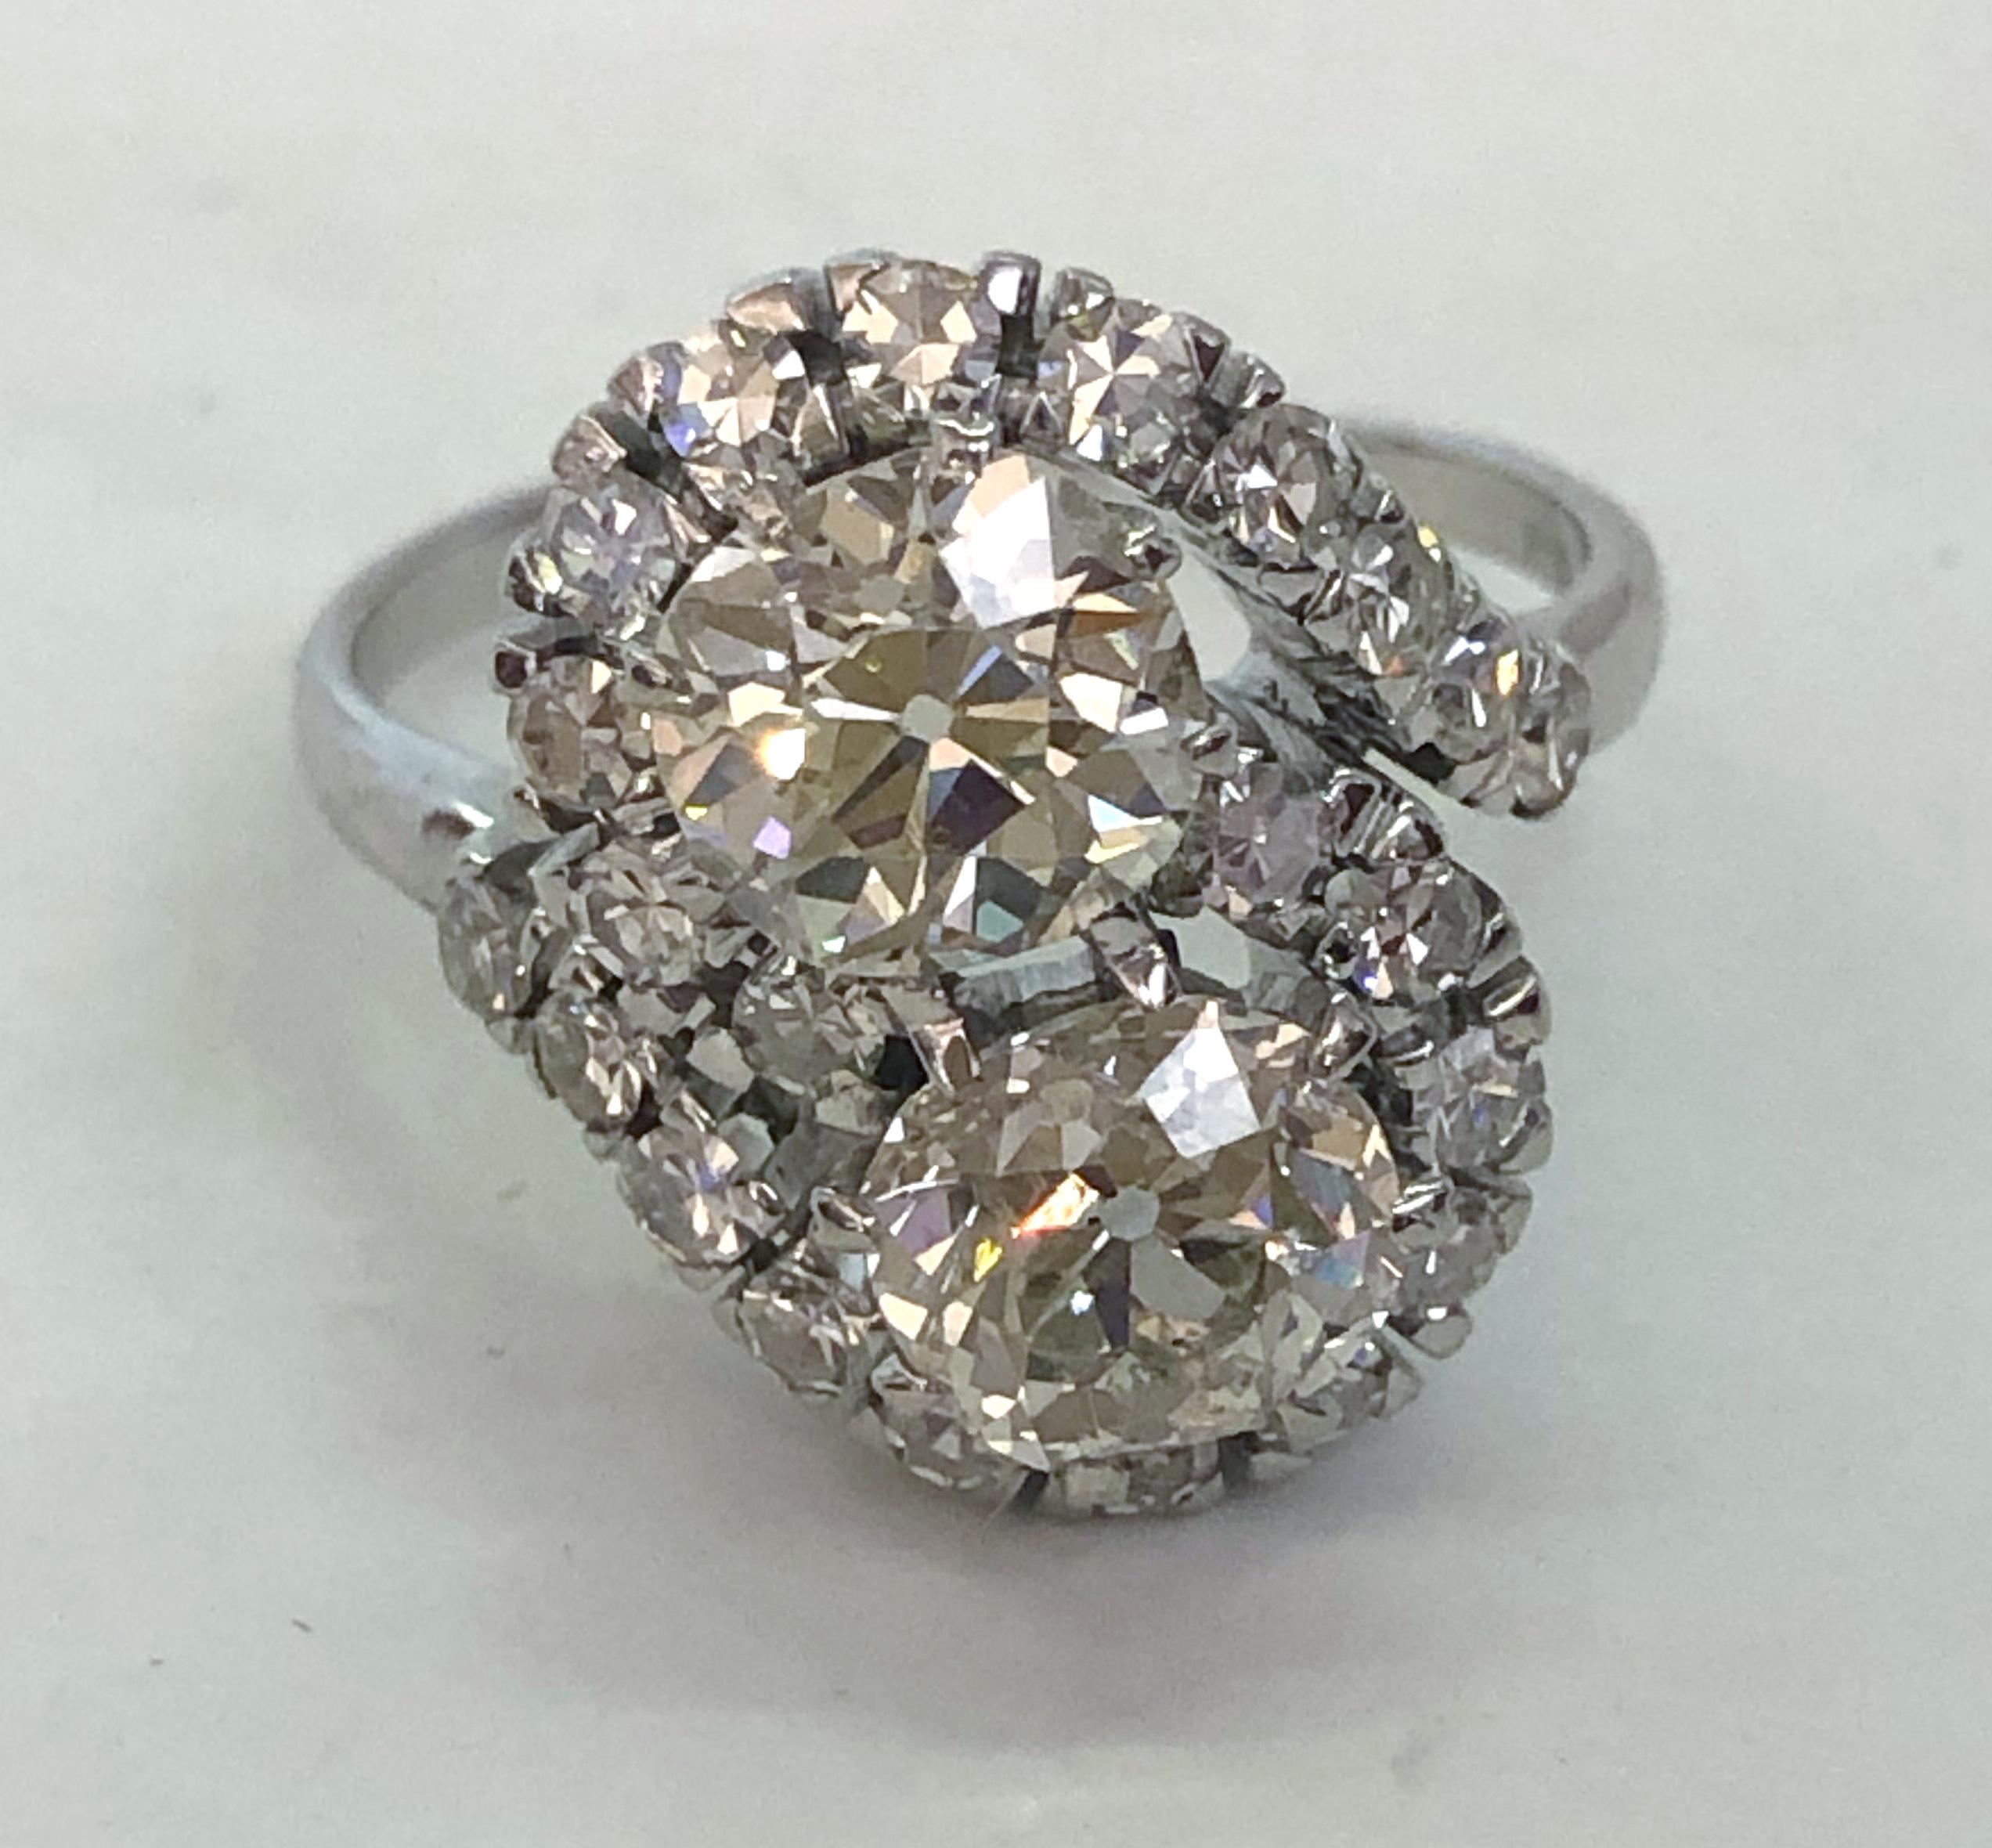 18 karat white gold contrarie ring with two large central diamonds of 1.1 karats each, and brilliant diamonds on the contour for a total of 0.4 karats / Italy 1950s
Ring size US 7.5